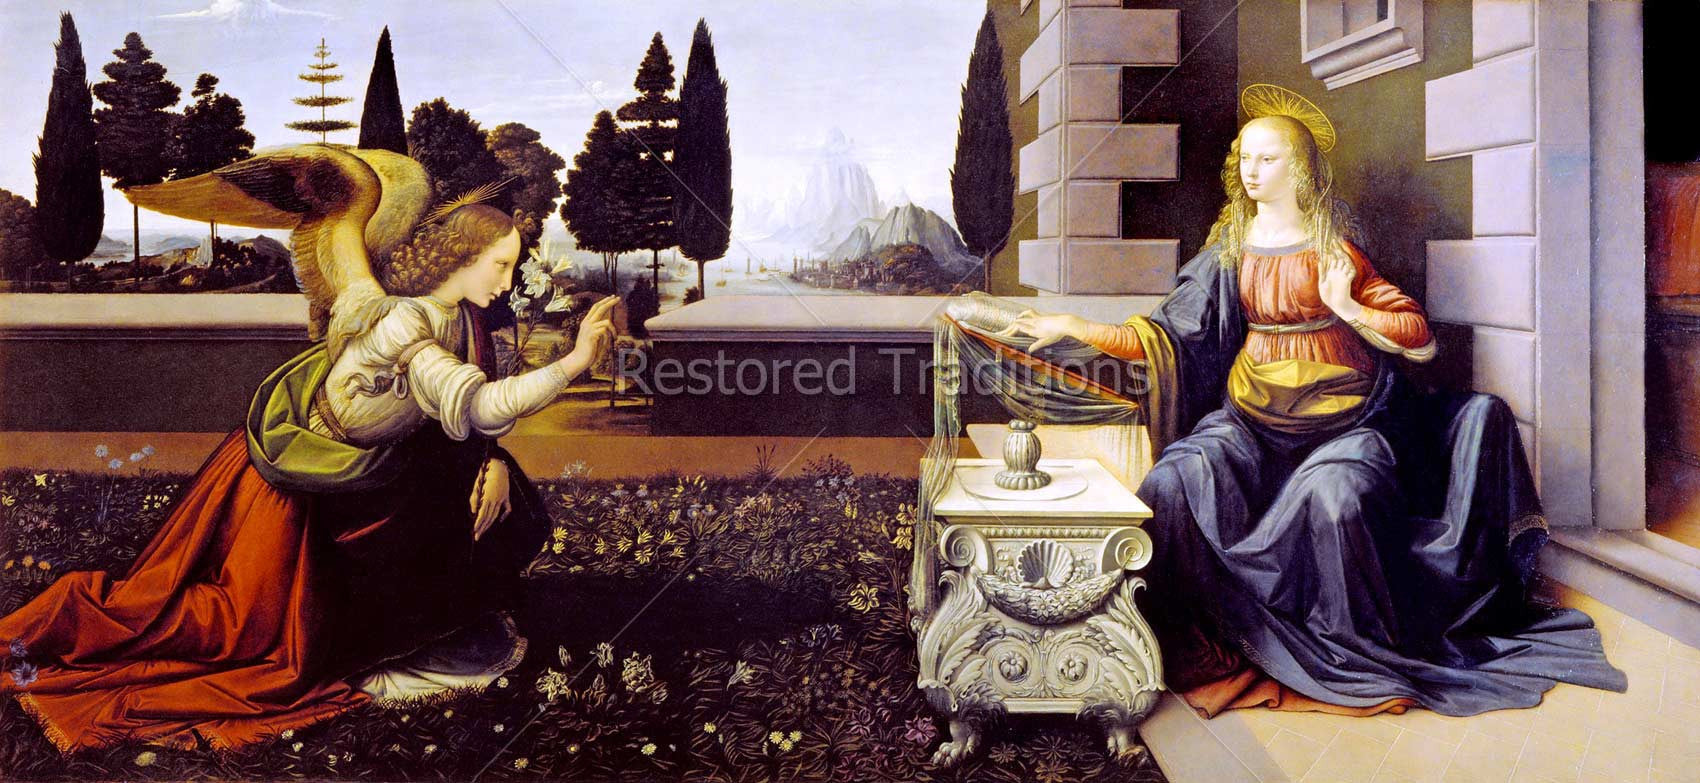 High Resolution Religious Image | The Annunciation, by Da Vinci - Restored  Traditions